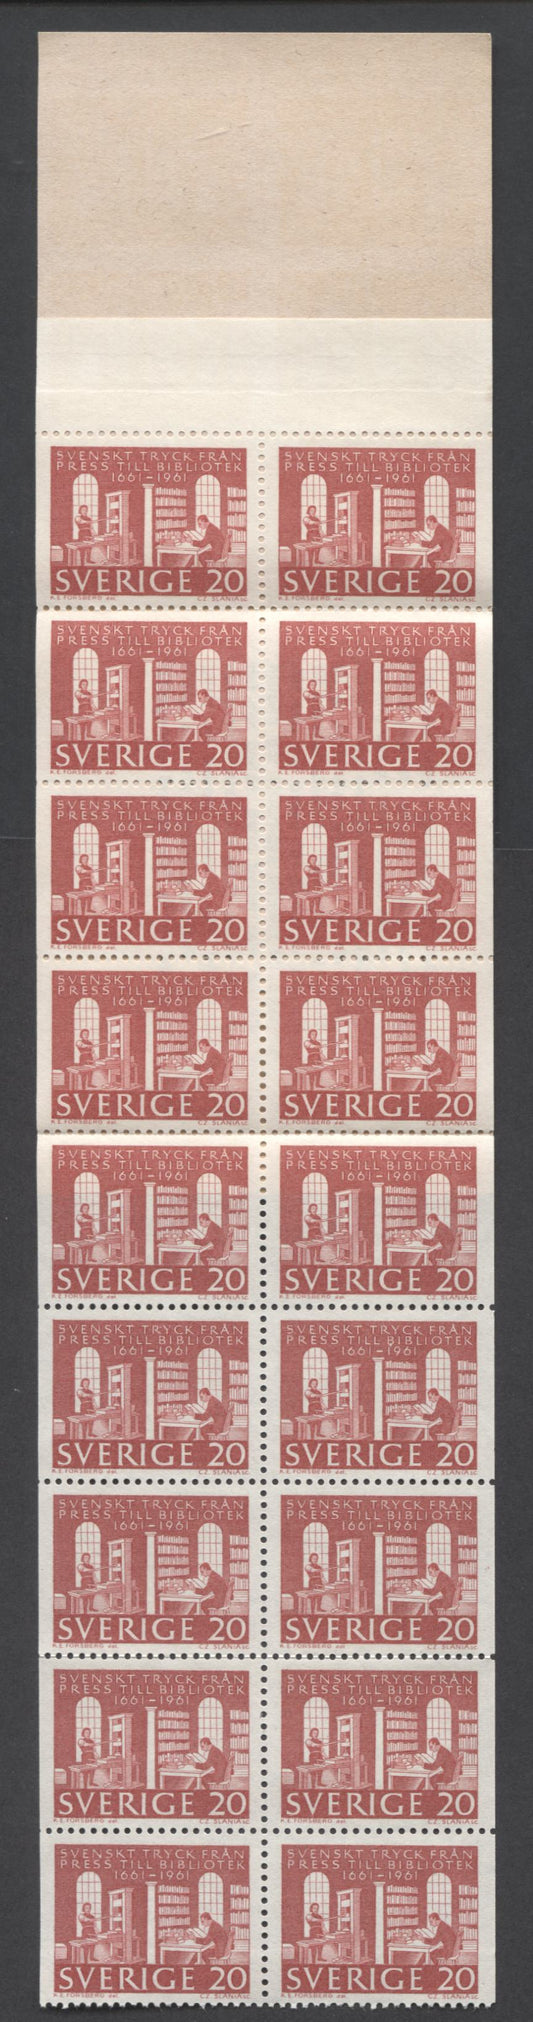 Lot 175 Sweden SC#602a (Facit #H142) 20 Ore Carmine 1961 300th Anniversary Of Royal Library Edict Issue, A VFNH Booklet of 20, Click on Listing to See ALL Pictures, Estimated Value $10